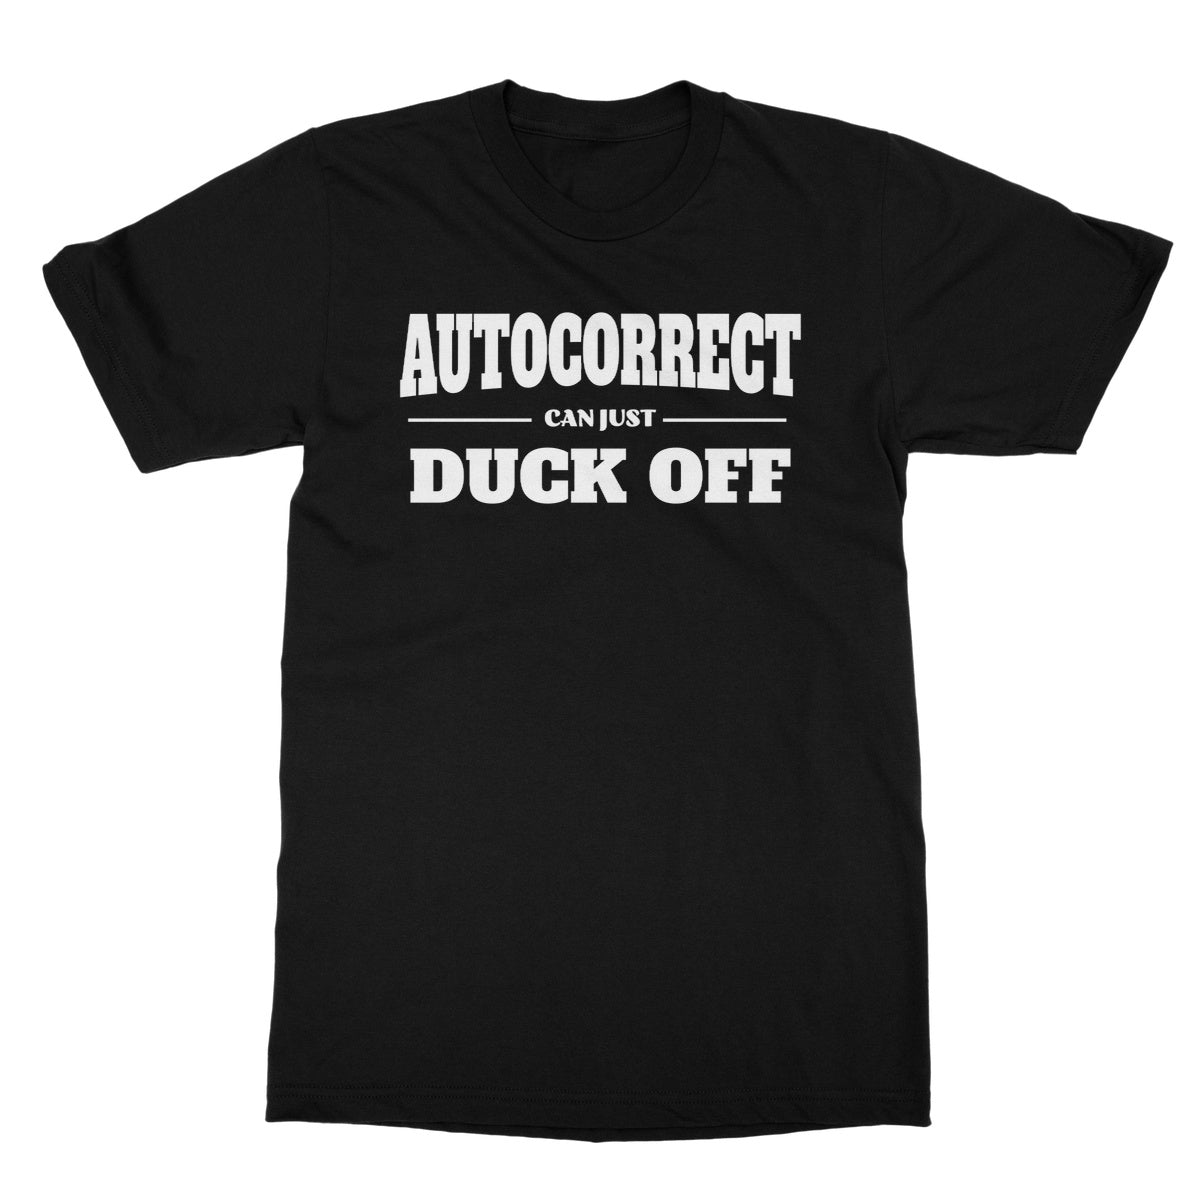 autocorrect can duck off t shirt black